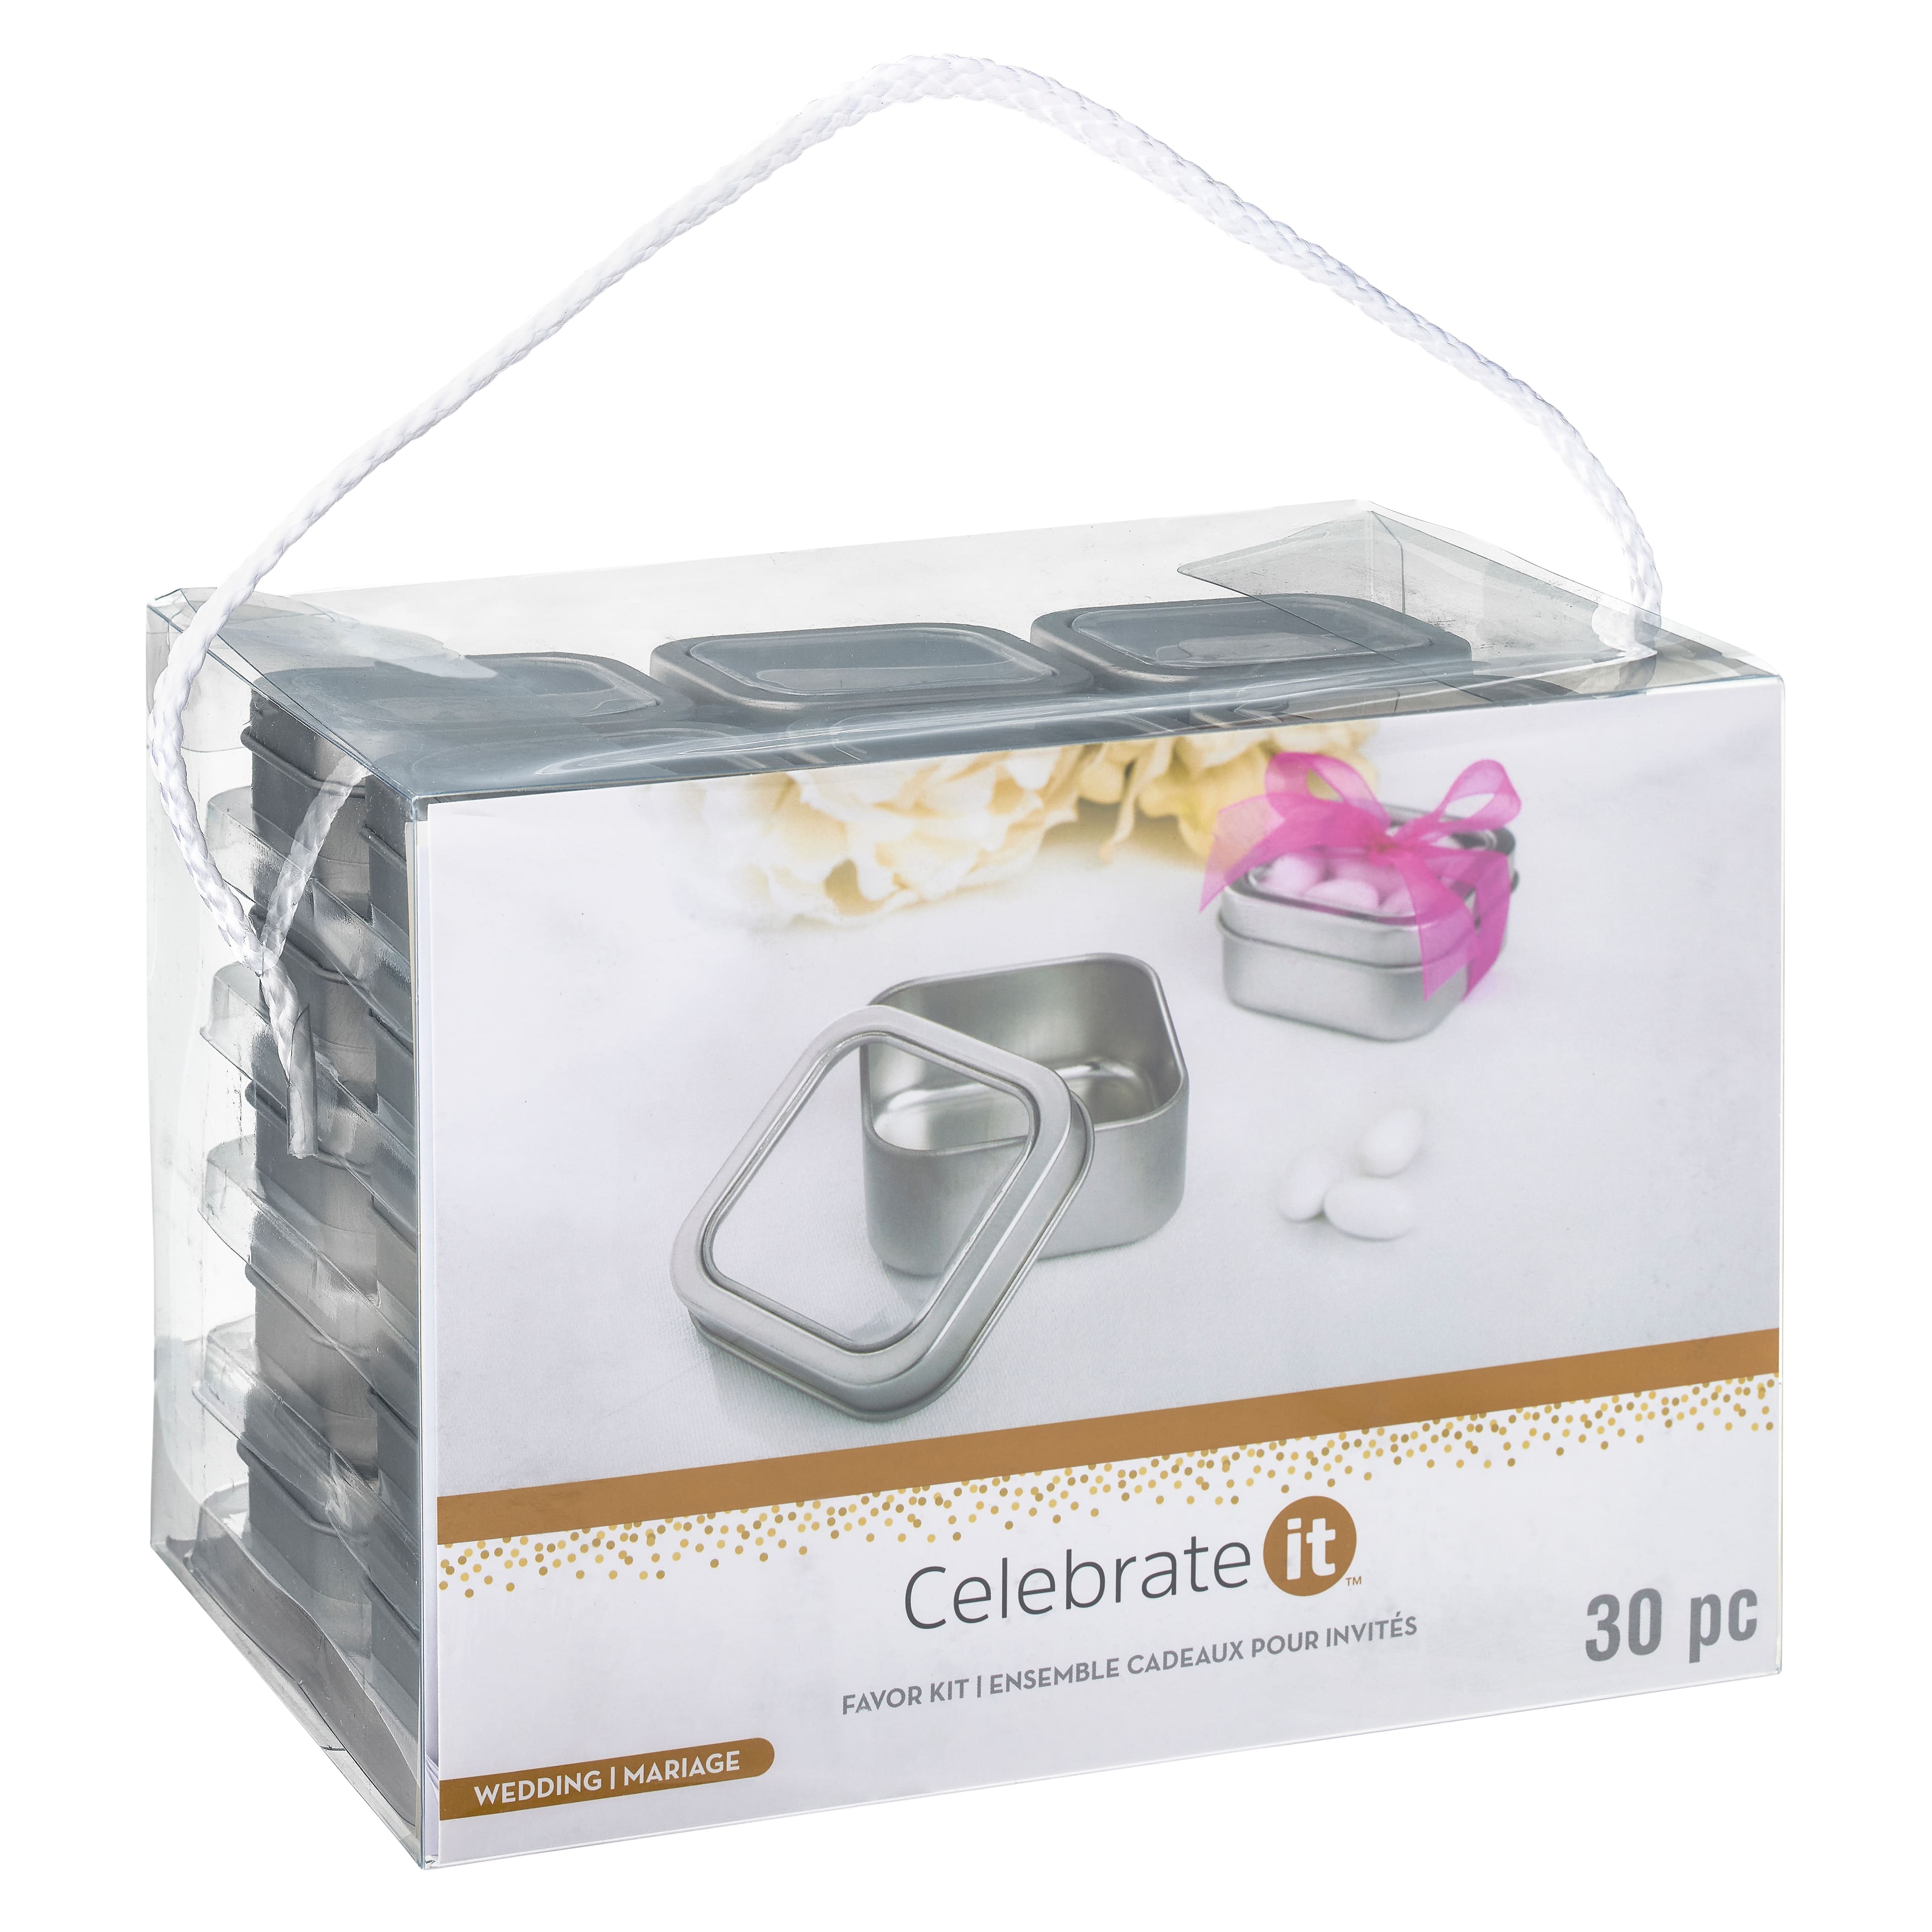 PVC Invitation clear boxes for party favors, weddings, packaging